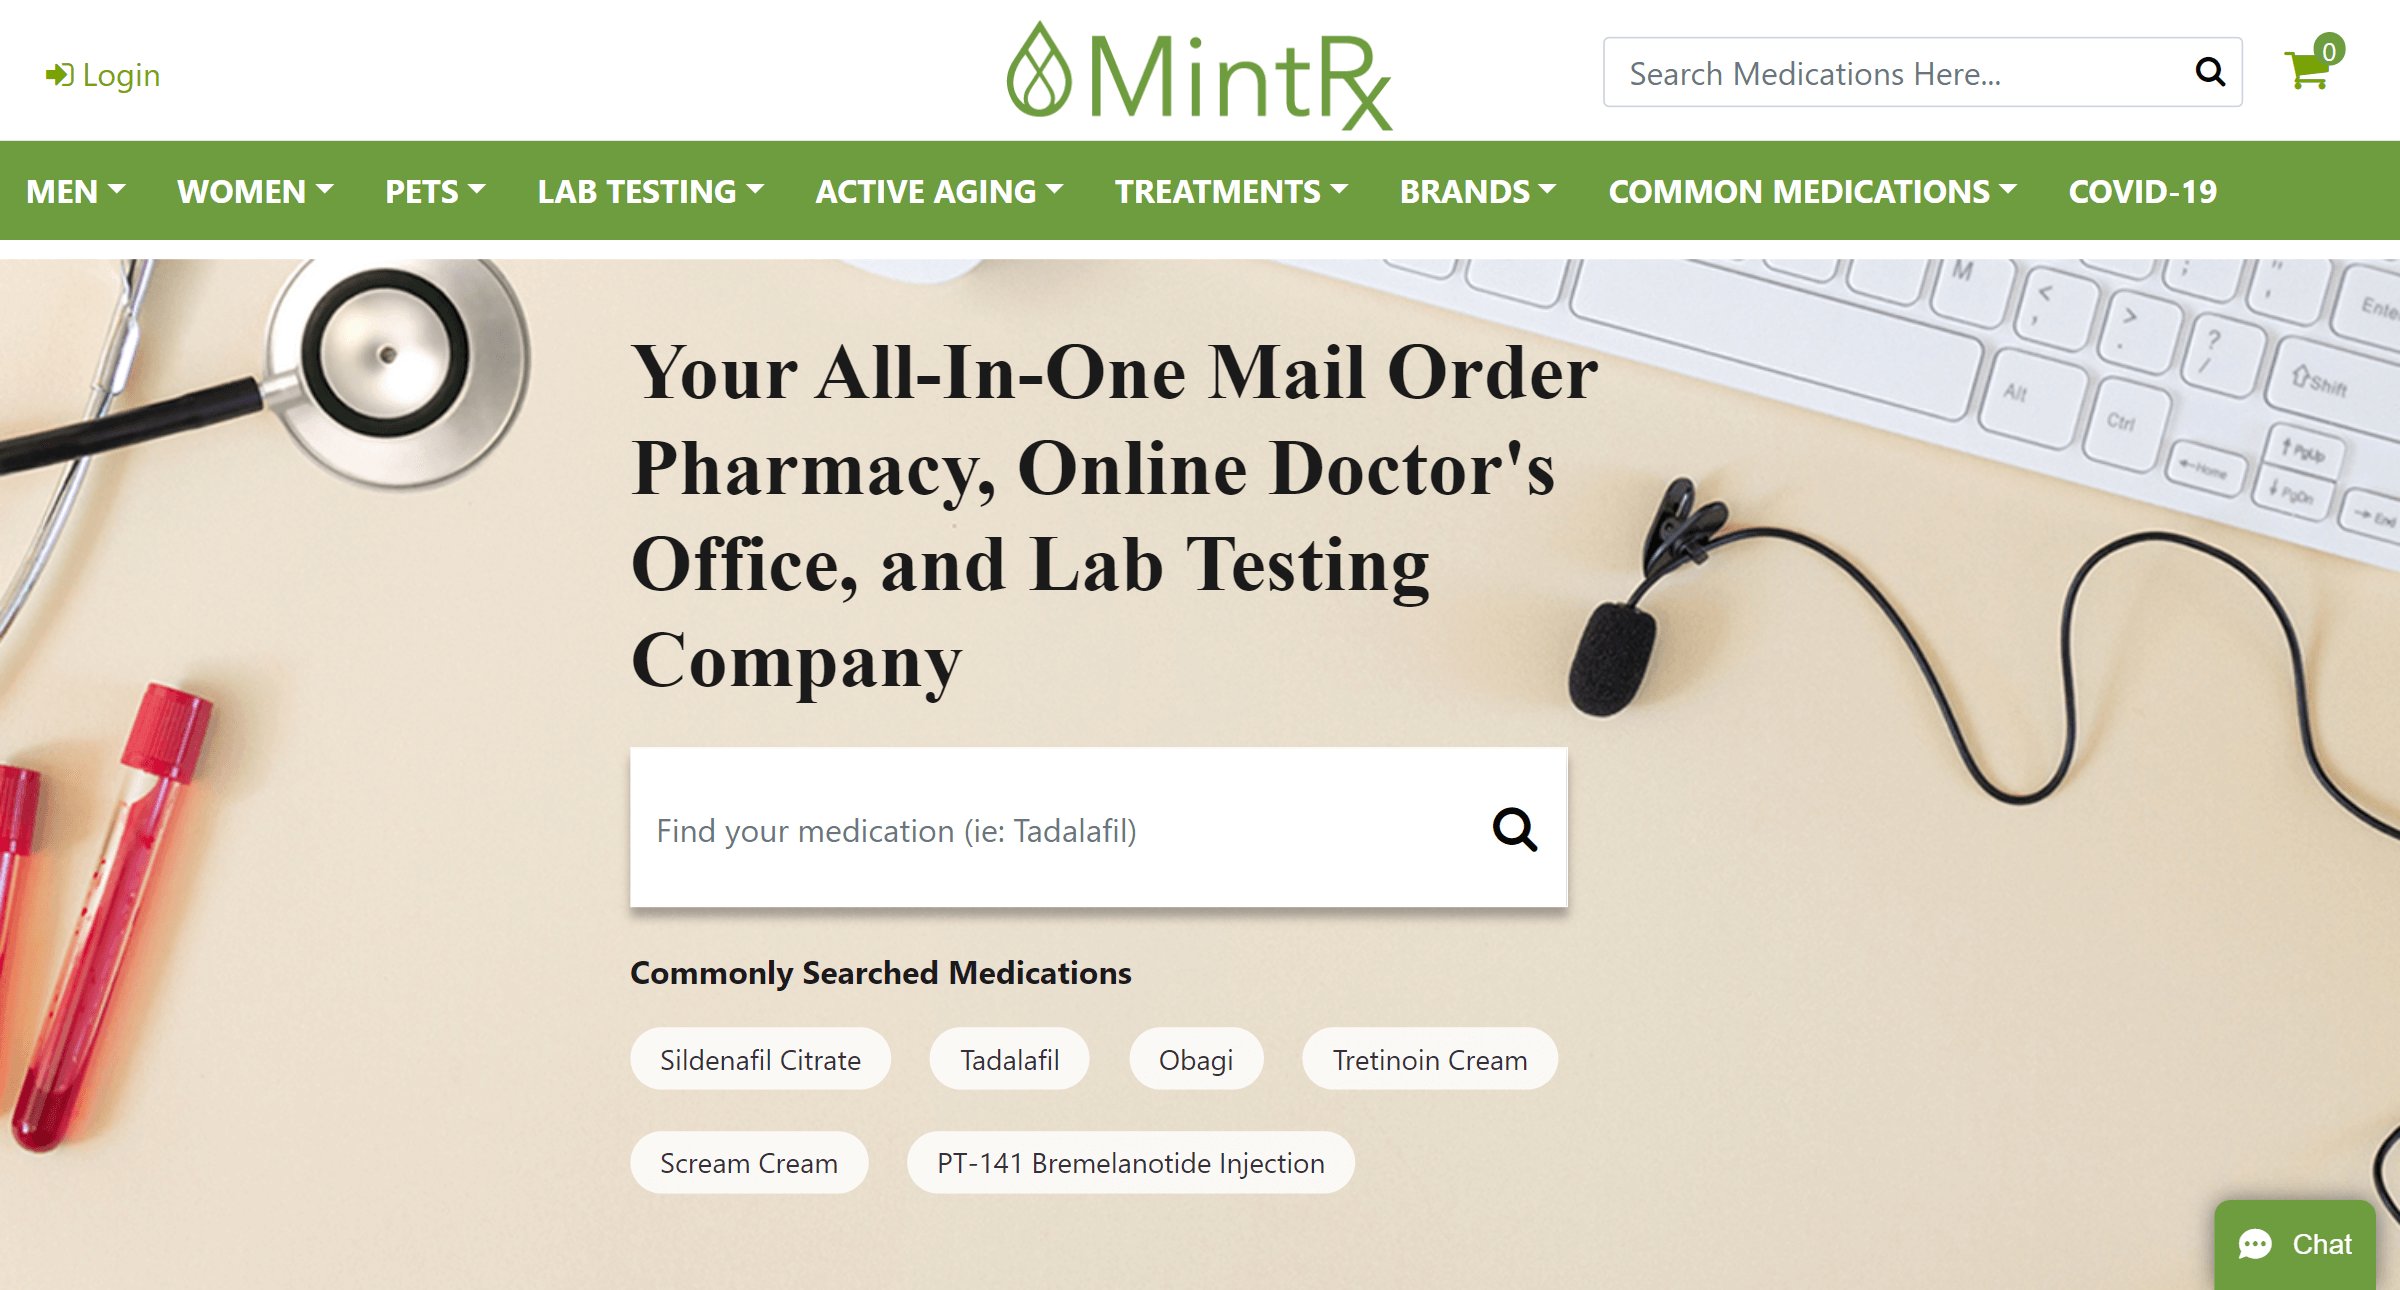 MintRx Pharmacy on ReadSomeReviews